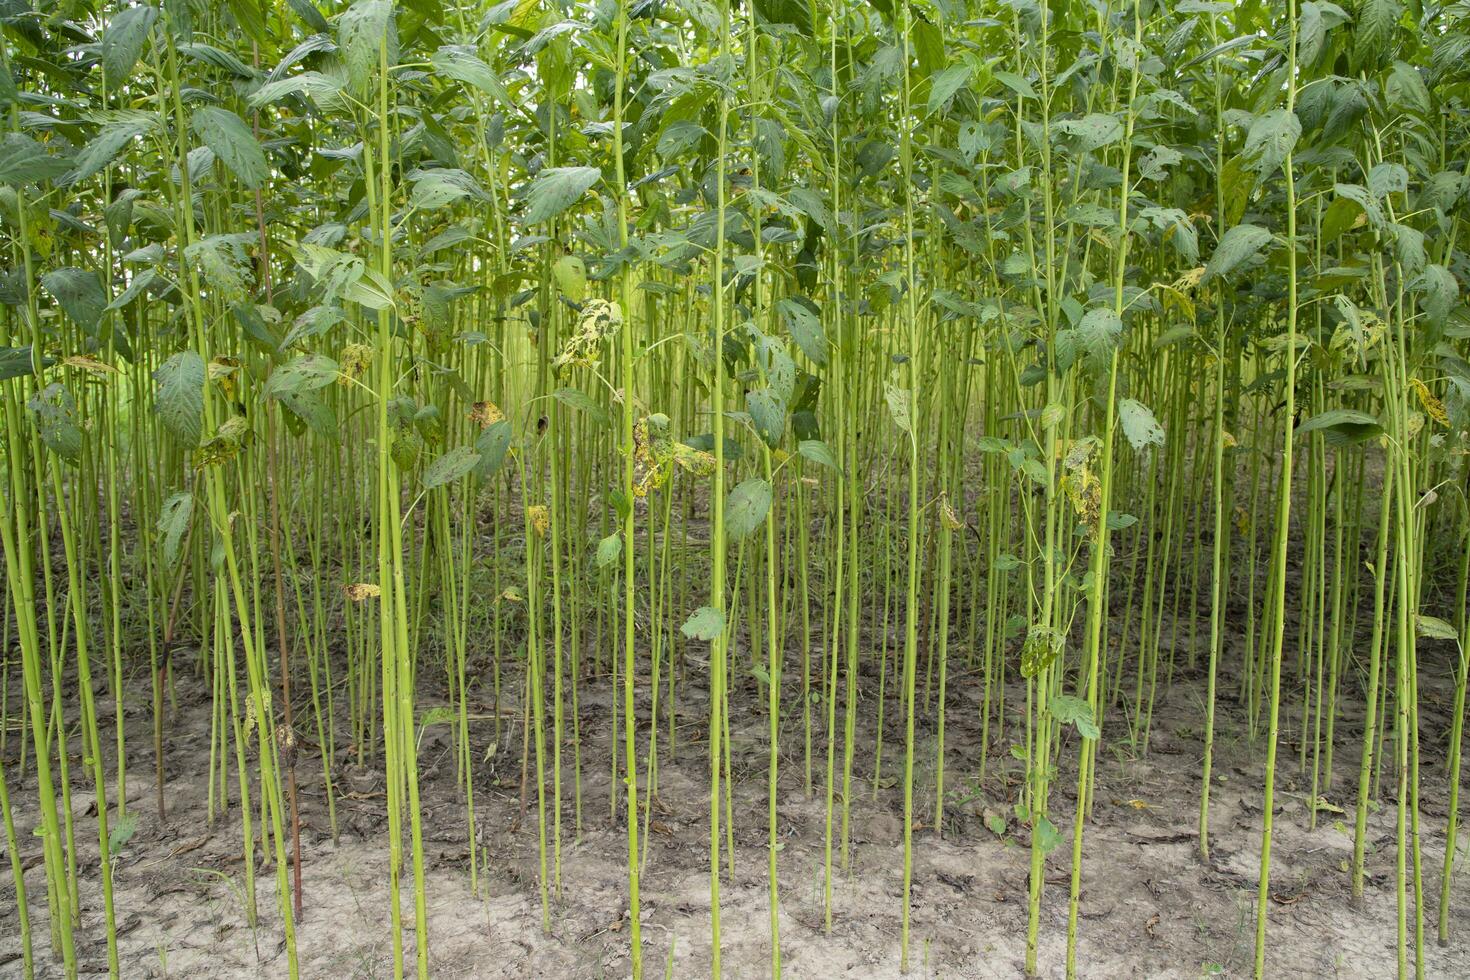 Green jute Plantation field.  Raw Jute plant pattern Texture background. This is the Called Golden Fiber in Bangladesh photo